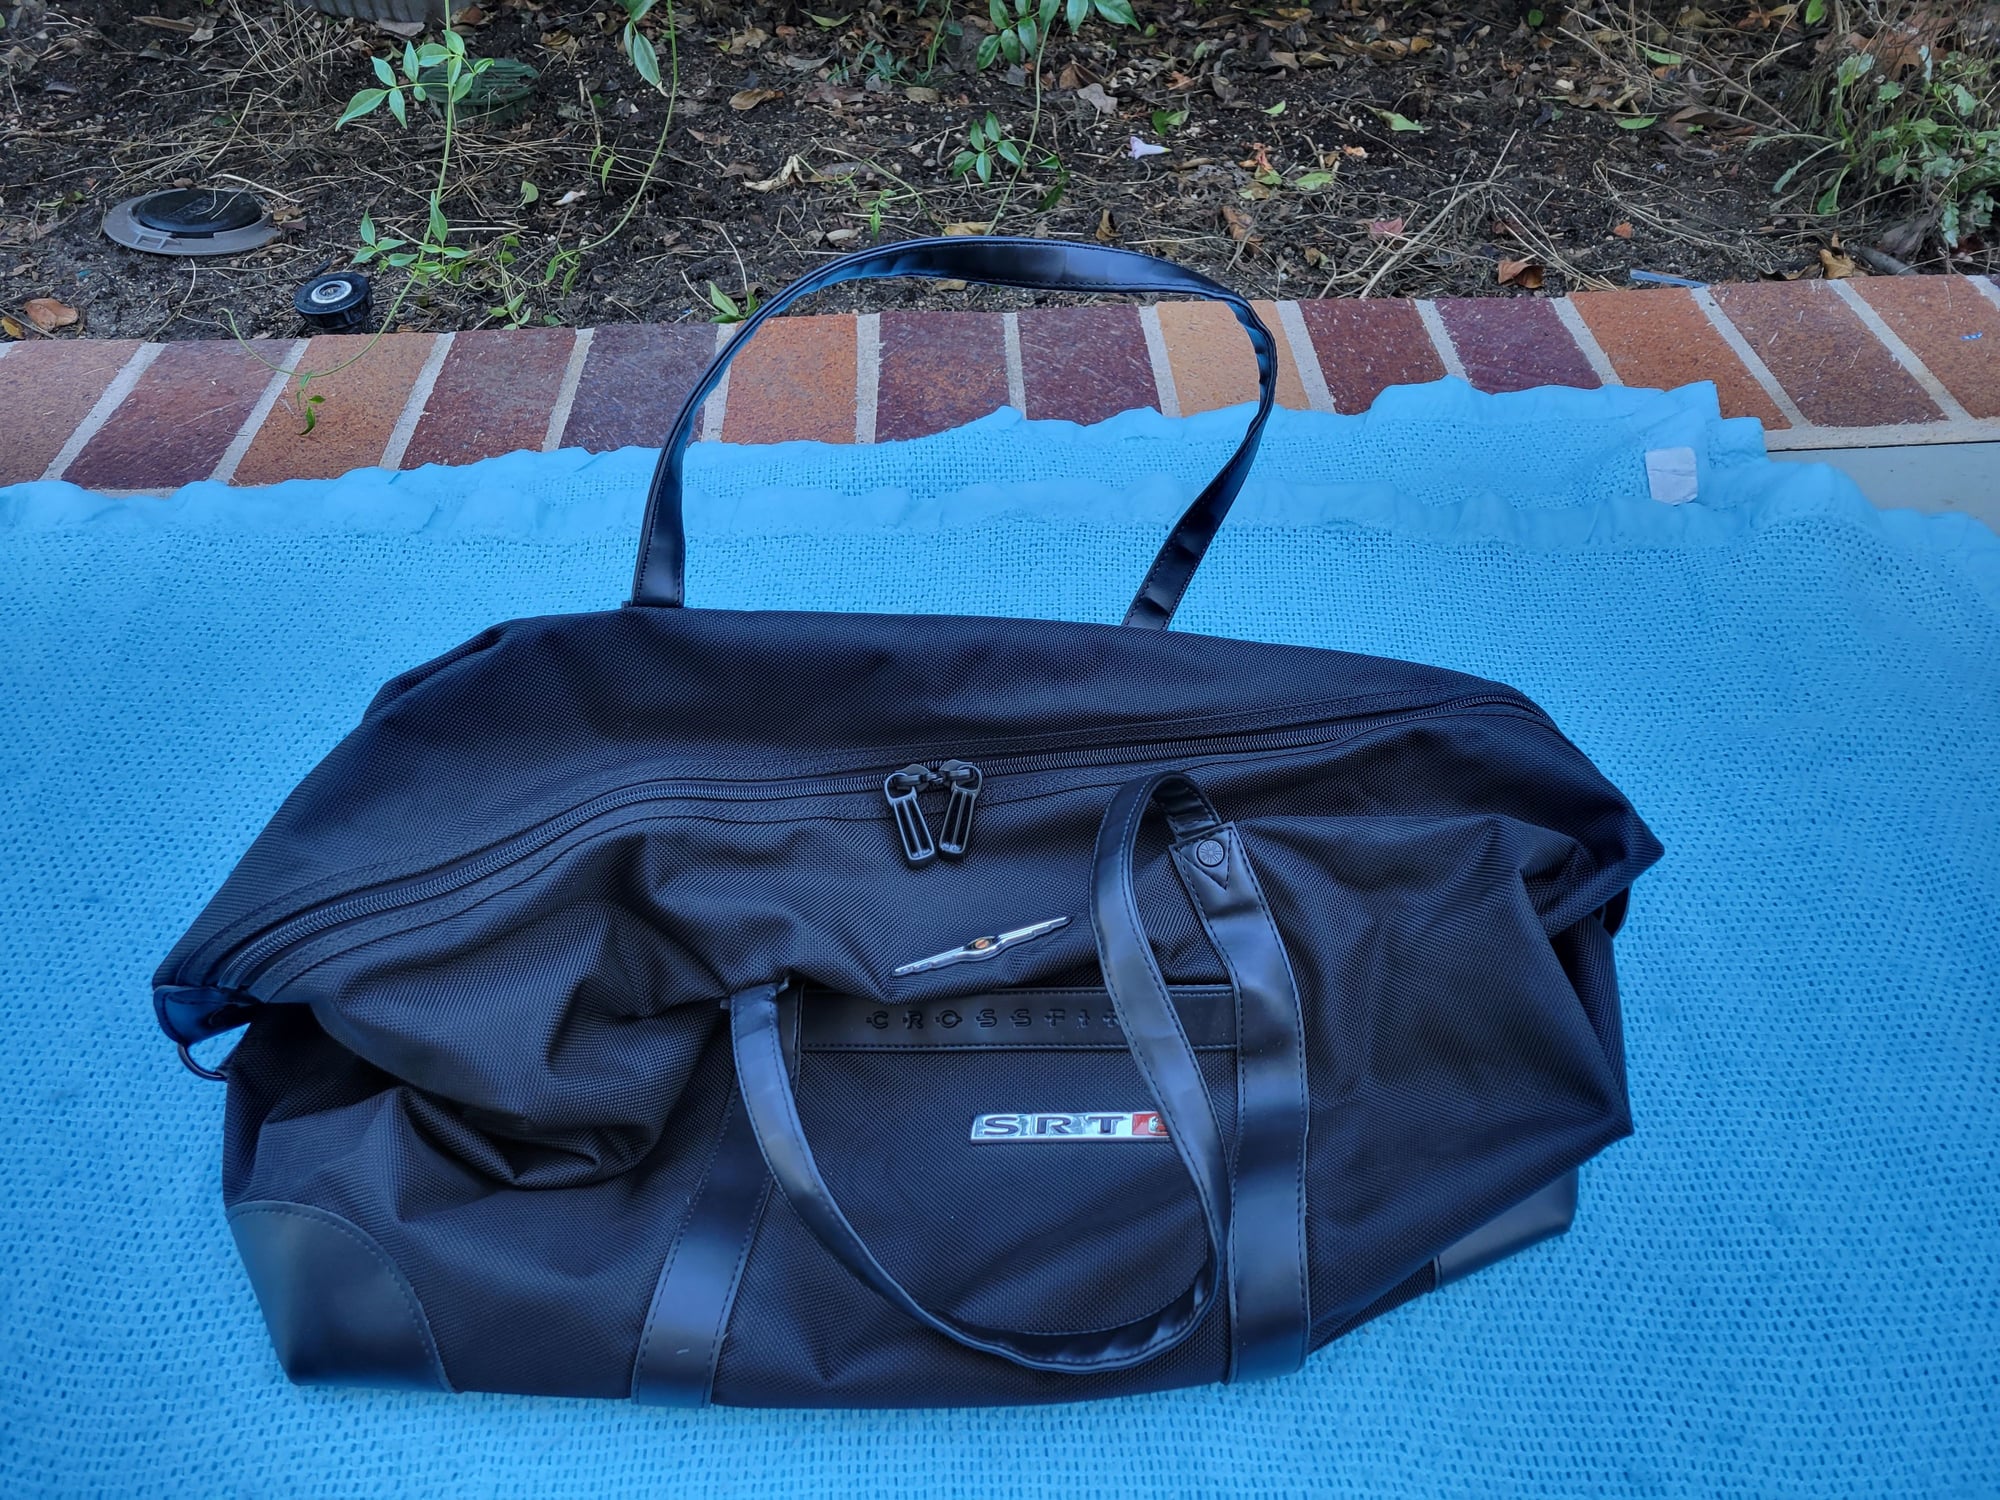 2005 Chrysler Crossfire - 3 Piece SRT6 Luggage Set - Accessories - $50 - Lake Forest, CA 92630, United States